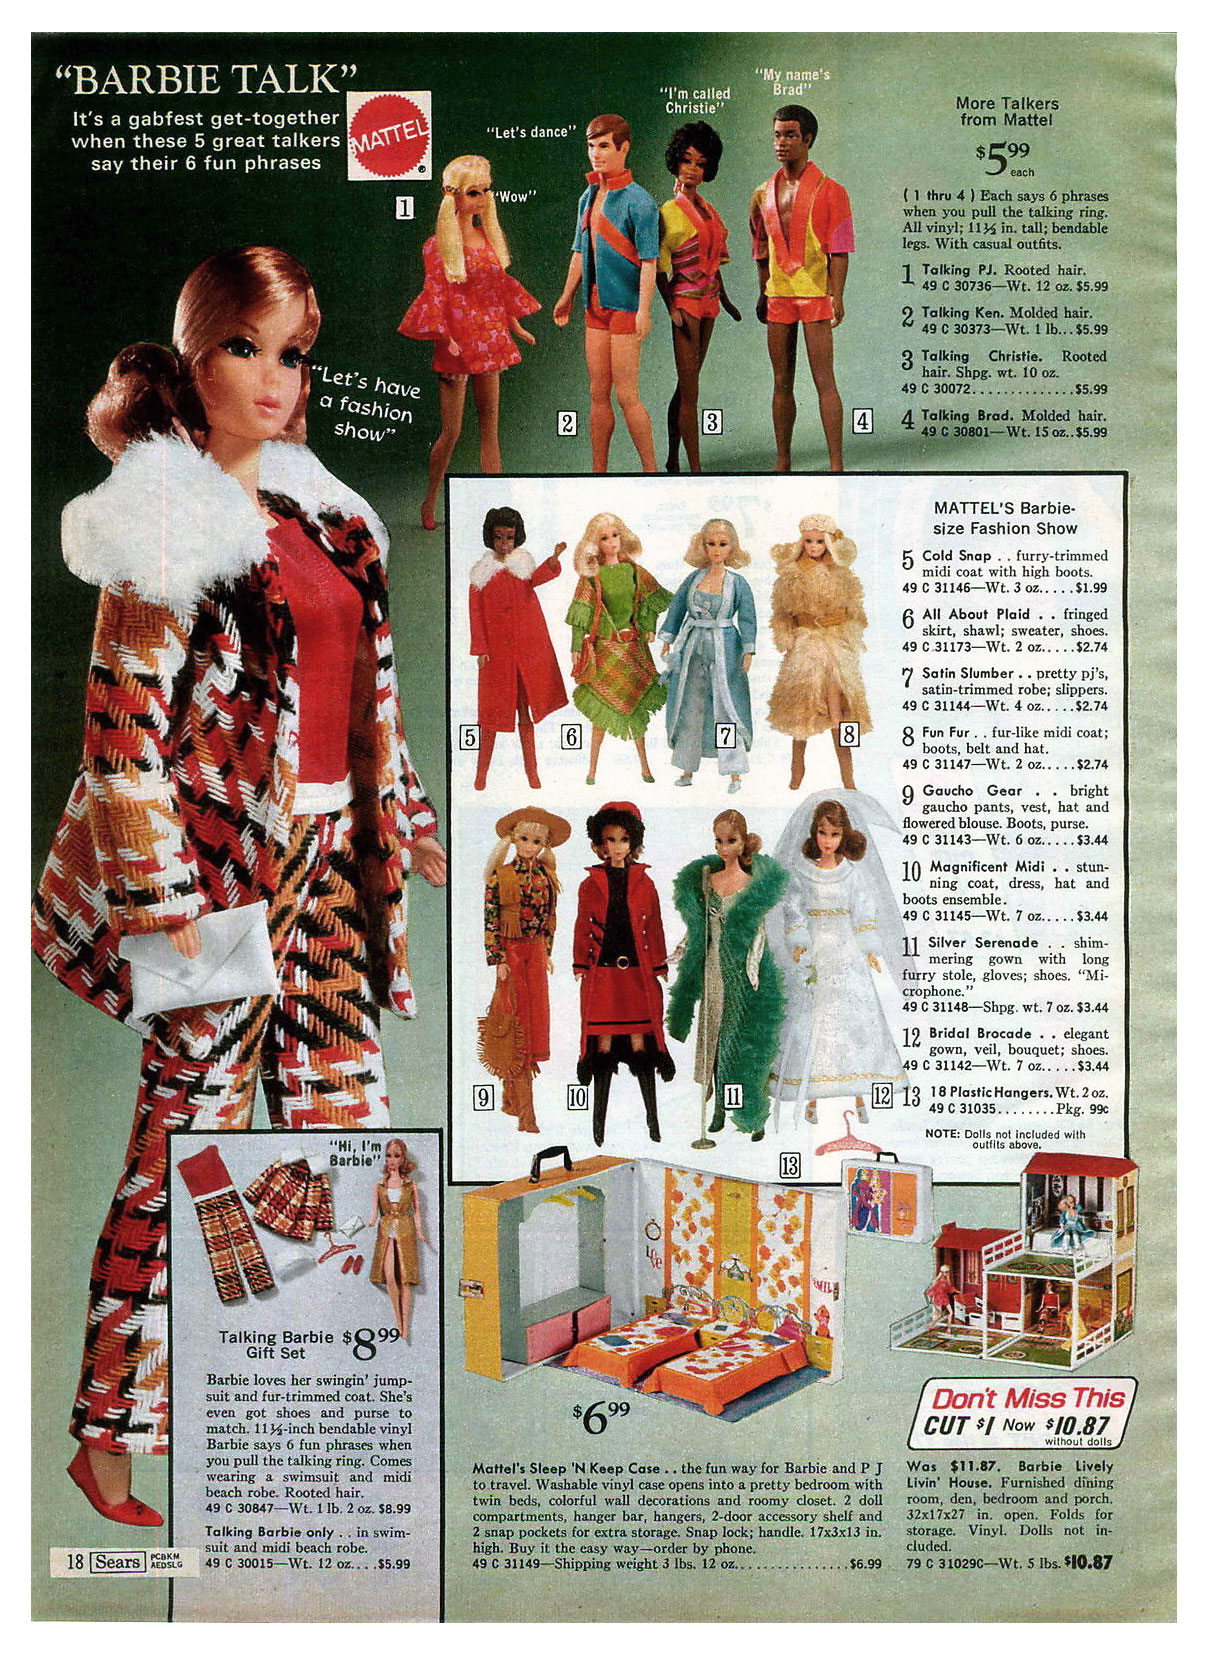 From 1971 Sears Wish Book